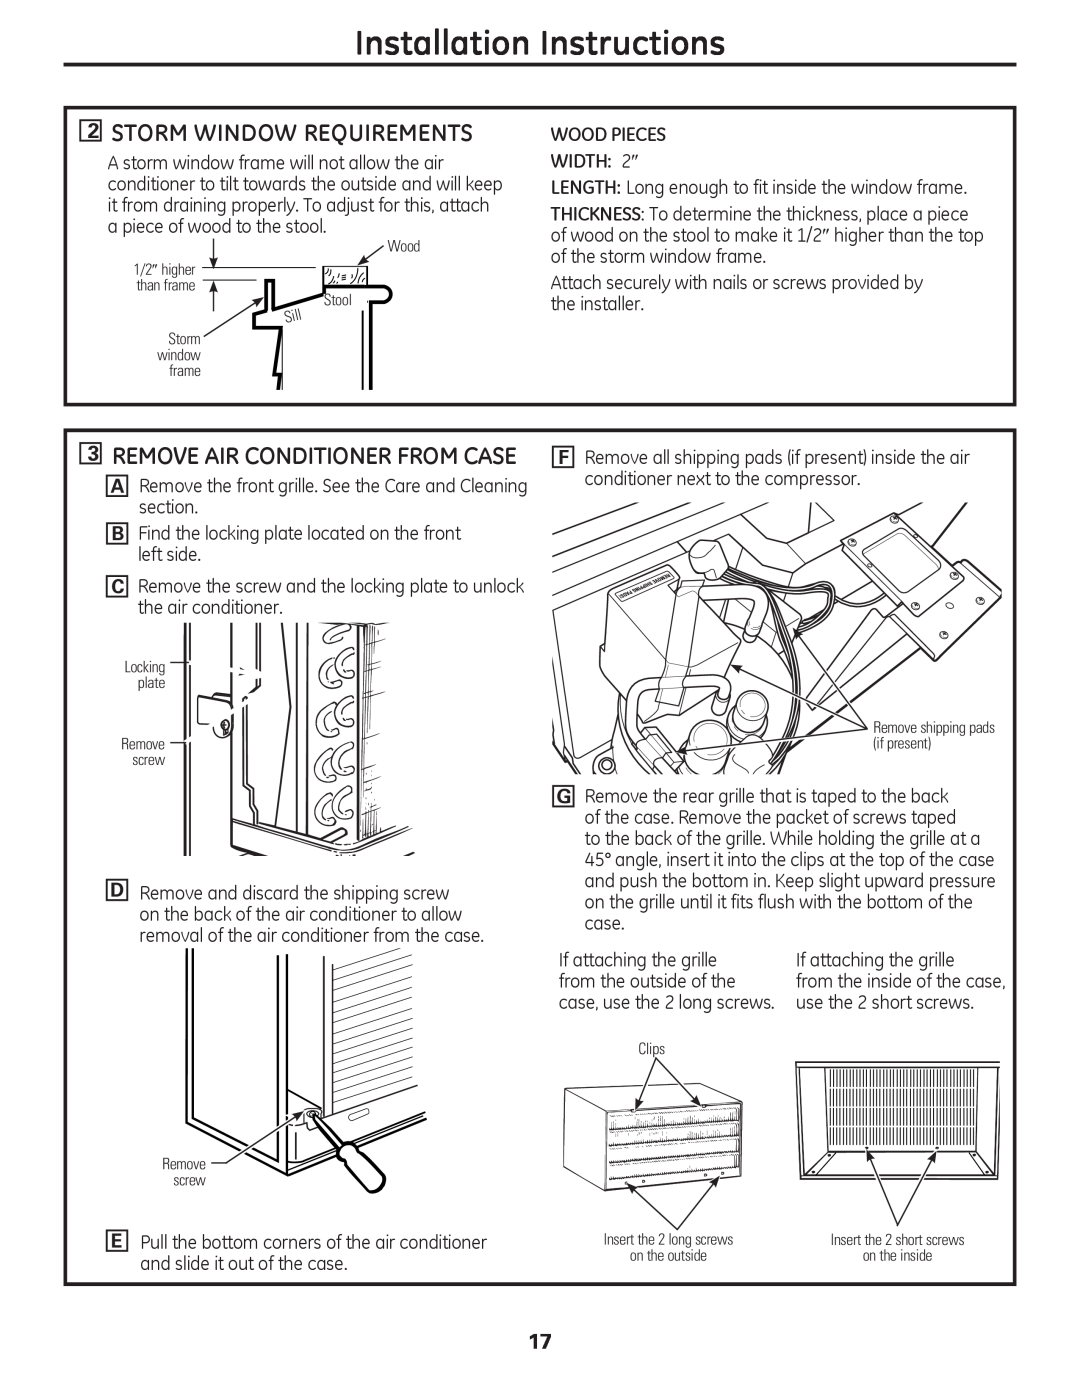 GE AJCM 08 ACD Remove Air Conditioner From Case, Storm Window Requirements, Installation Instructions 